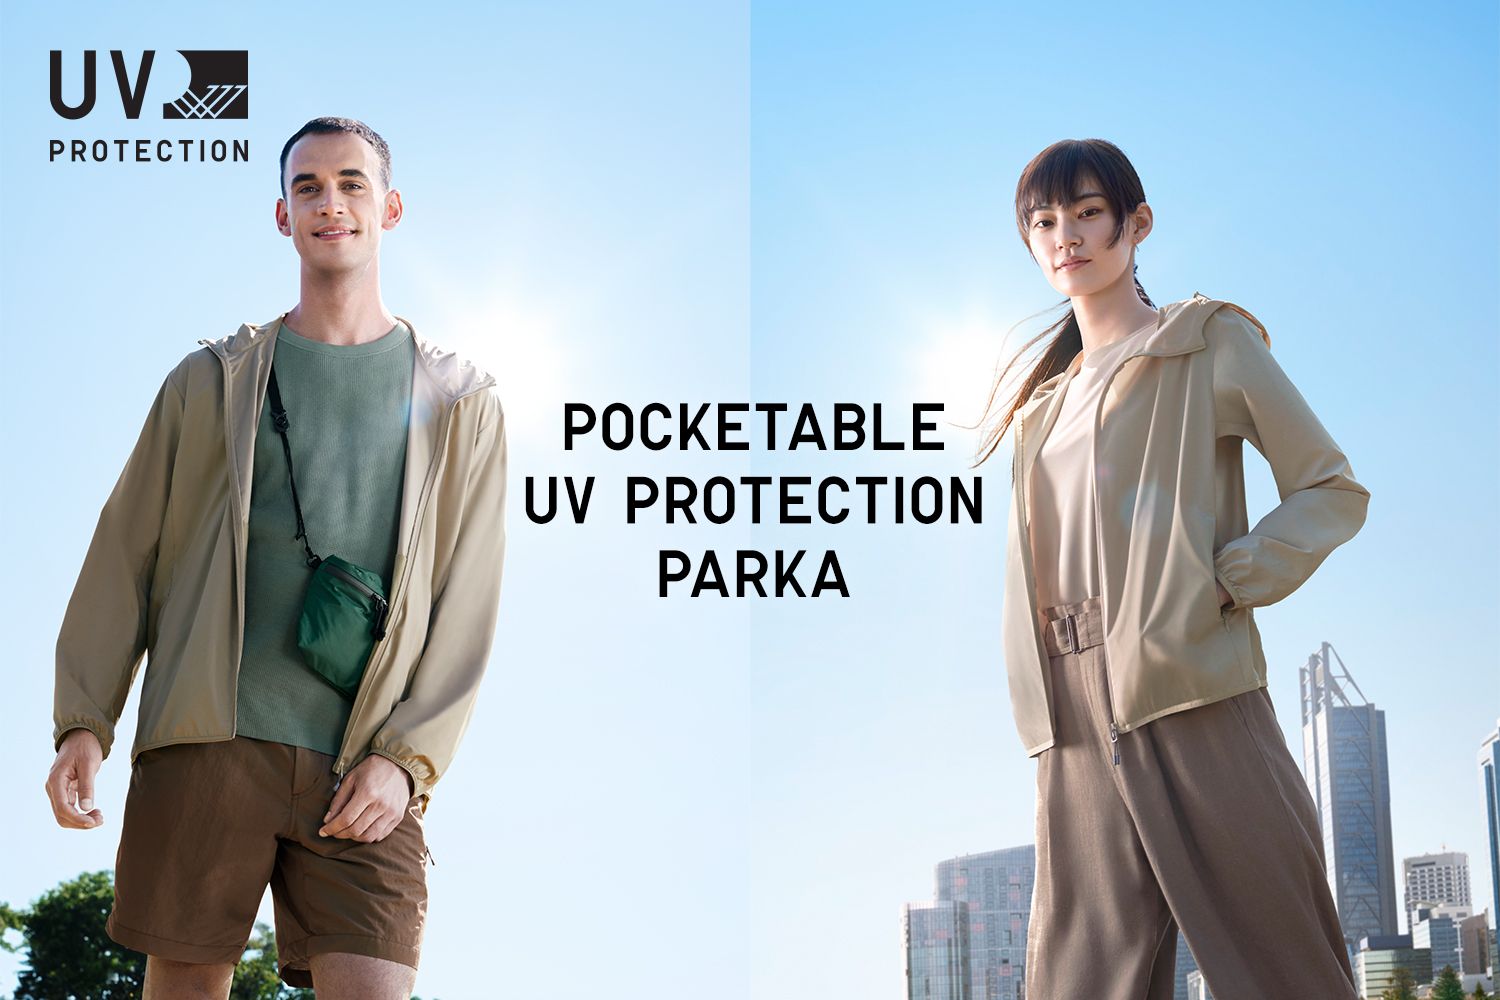 UNIQLO on X: Get breathable sun protection for your moments